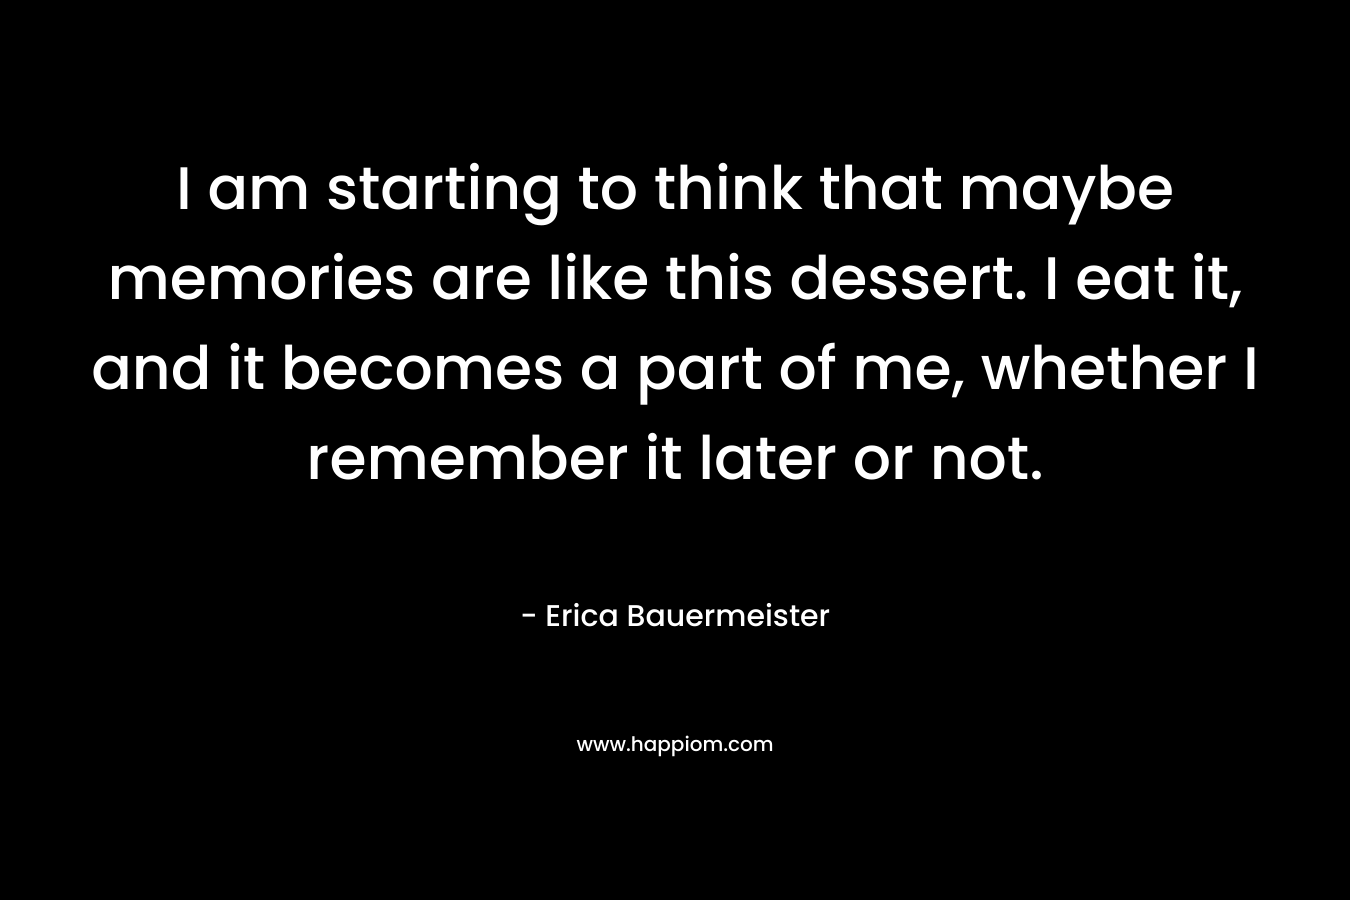 I am starting to think that maybe memories are like this dessert. I eat it, and it becomes a part of me, whether I remember it later or not. – Erica Bauermeister